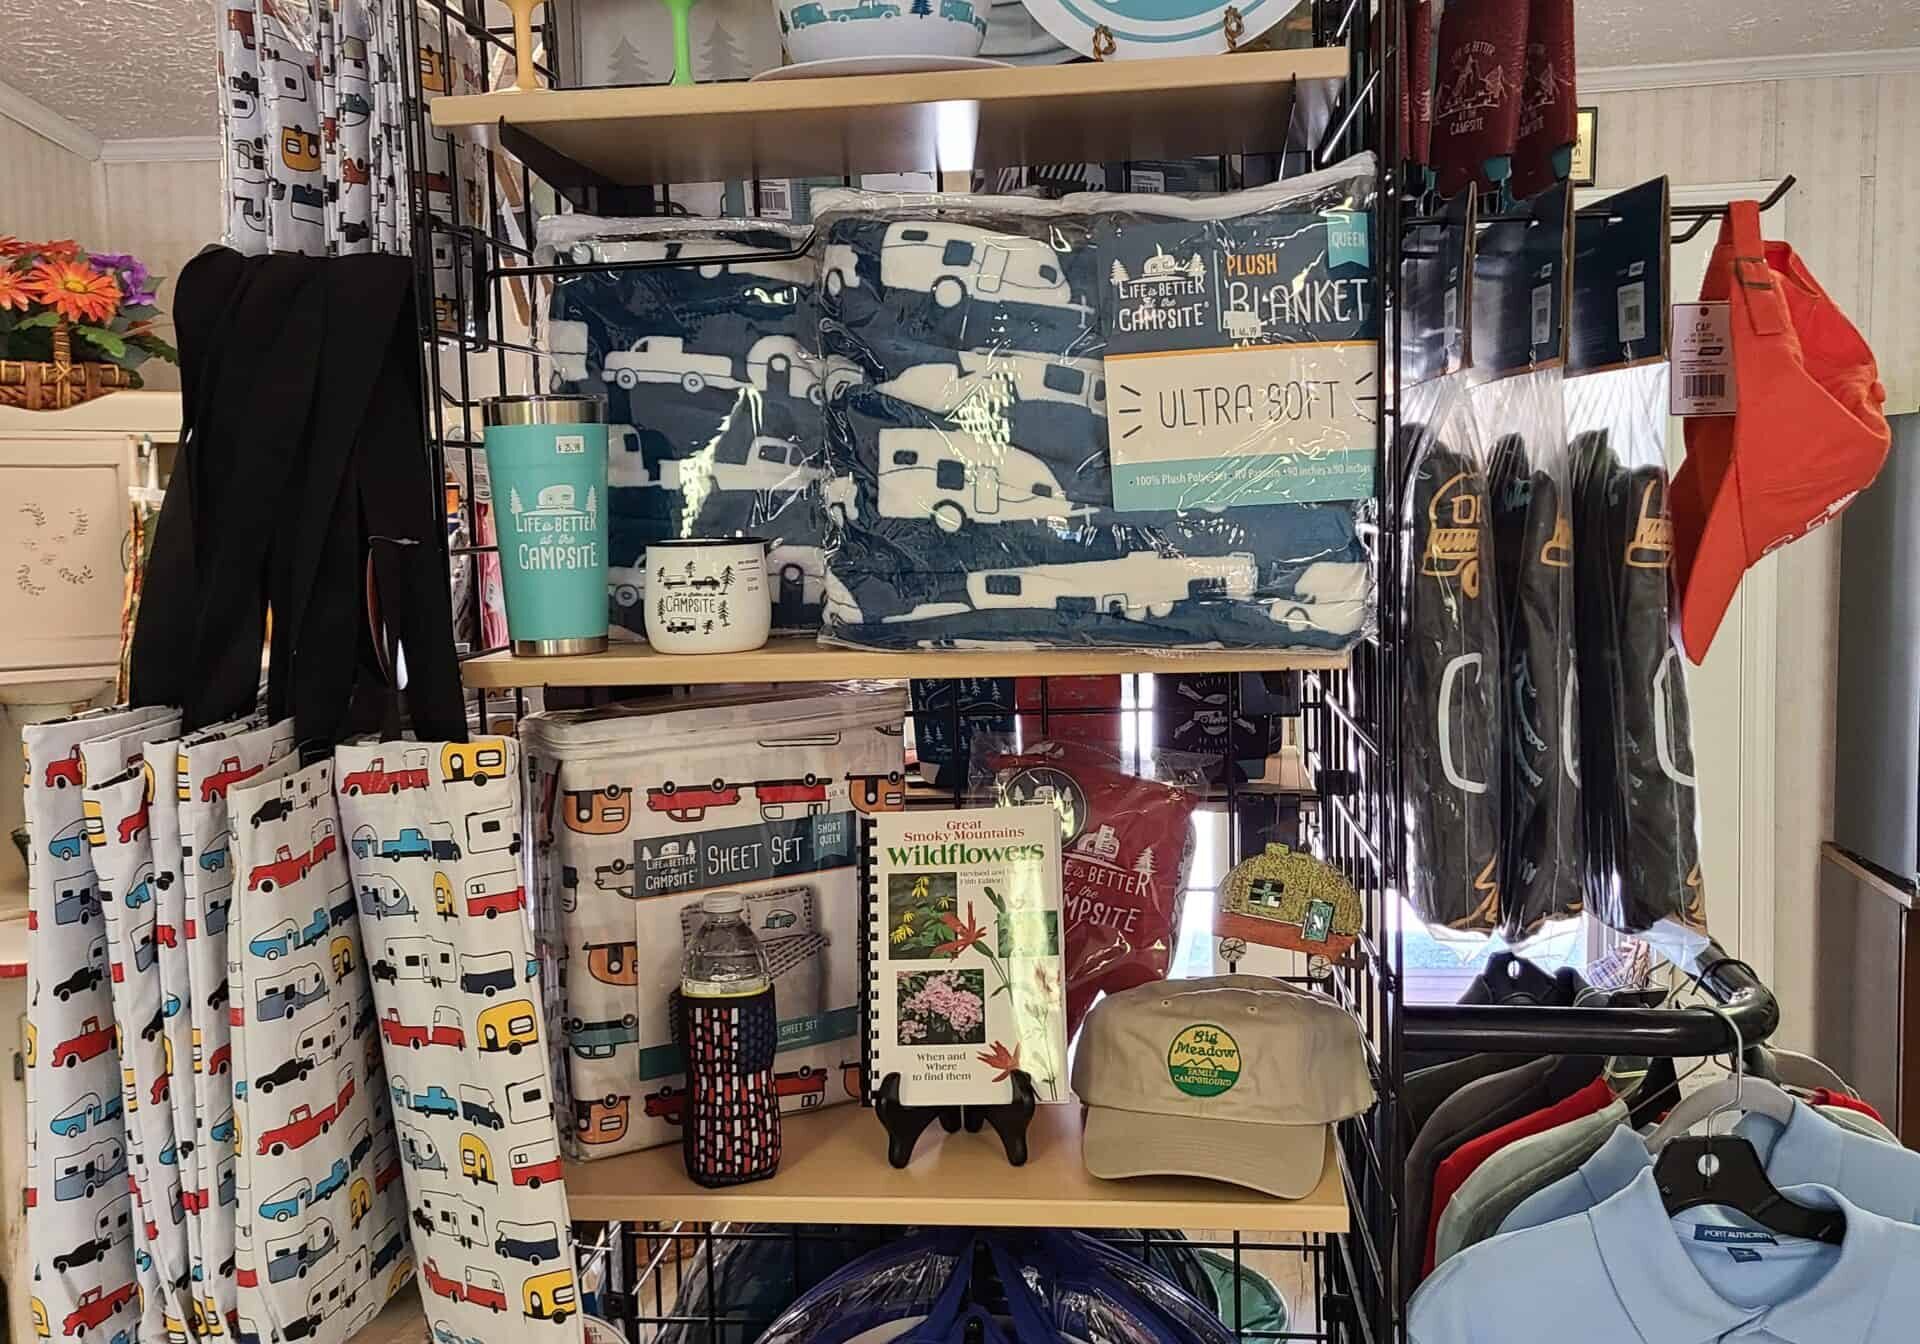 A display of shirts, hats, and other items in a store.